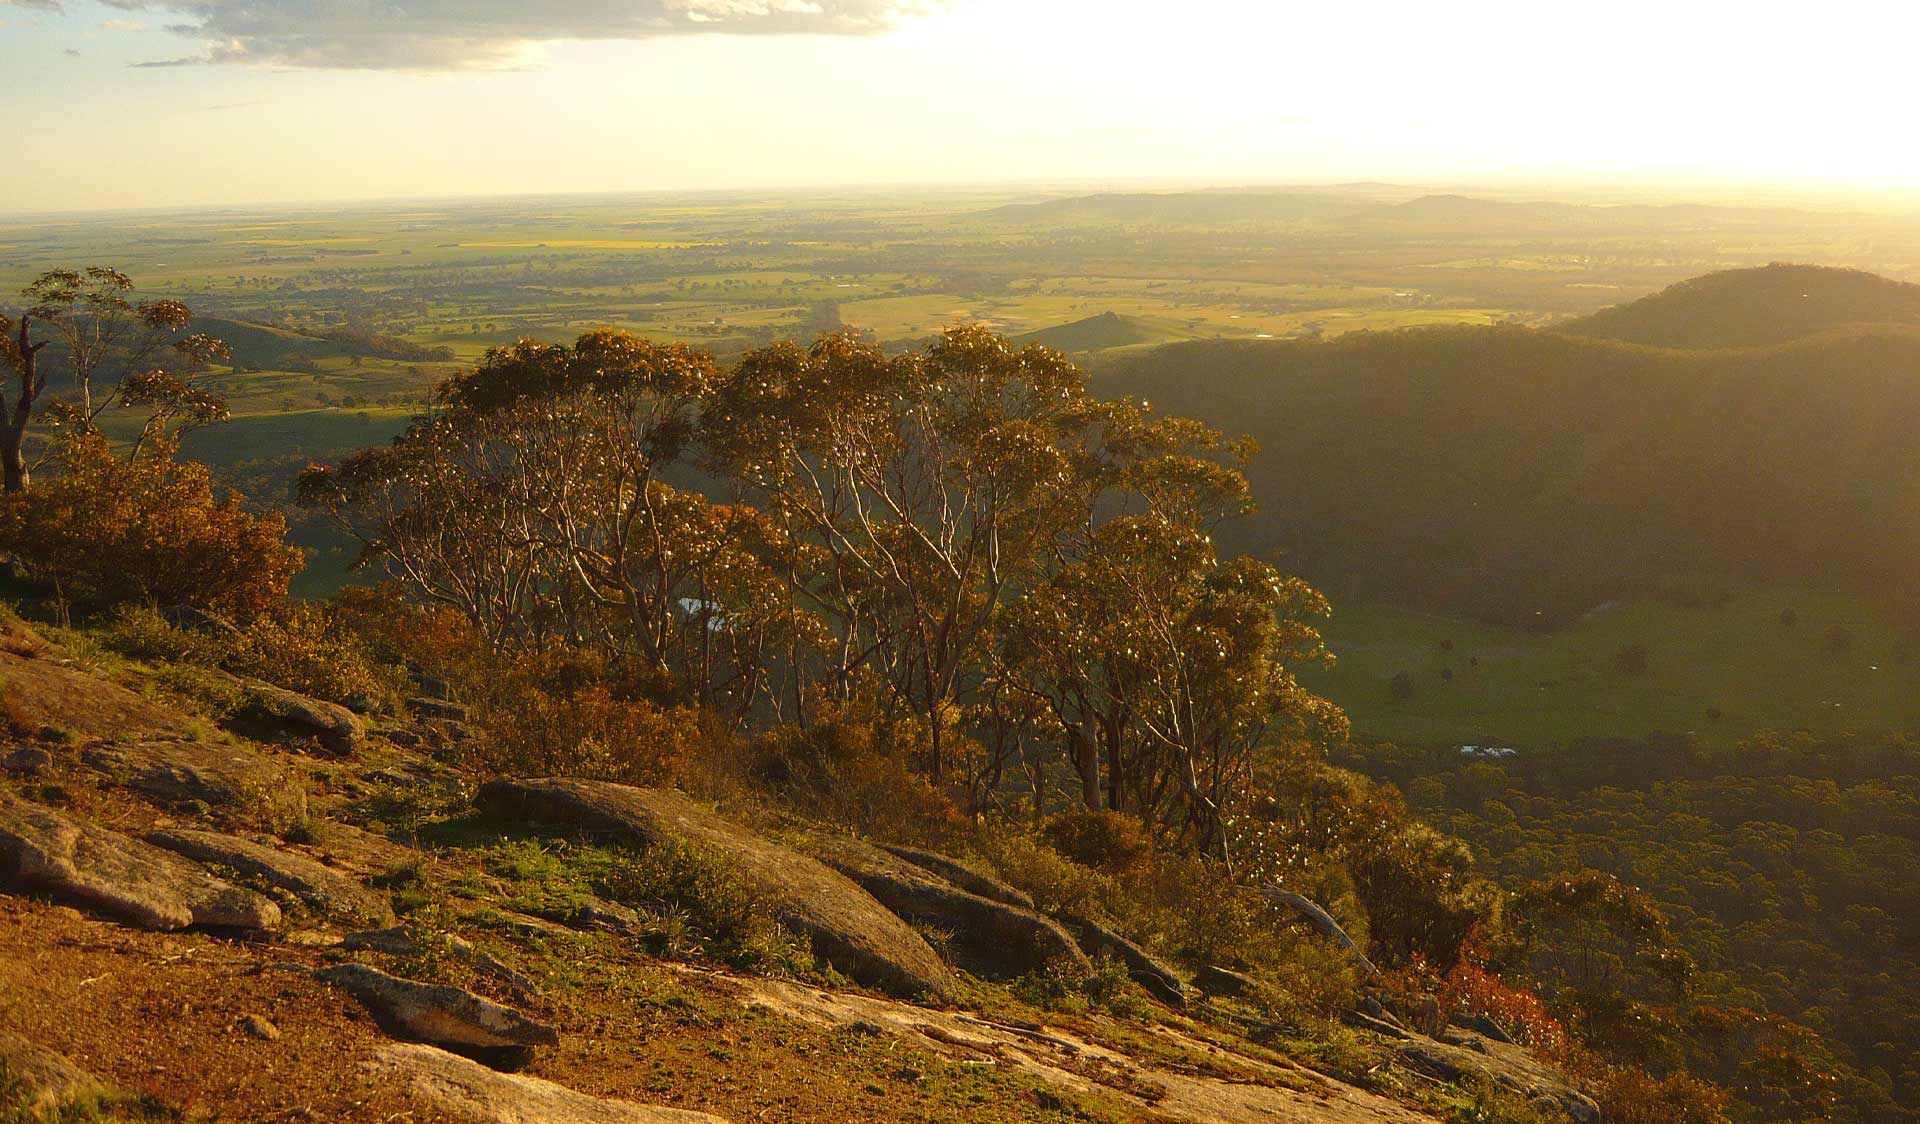 The view from Cave Hill at Mt Buangor State Park at dusk